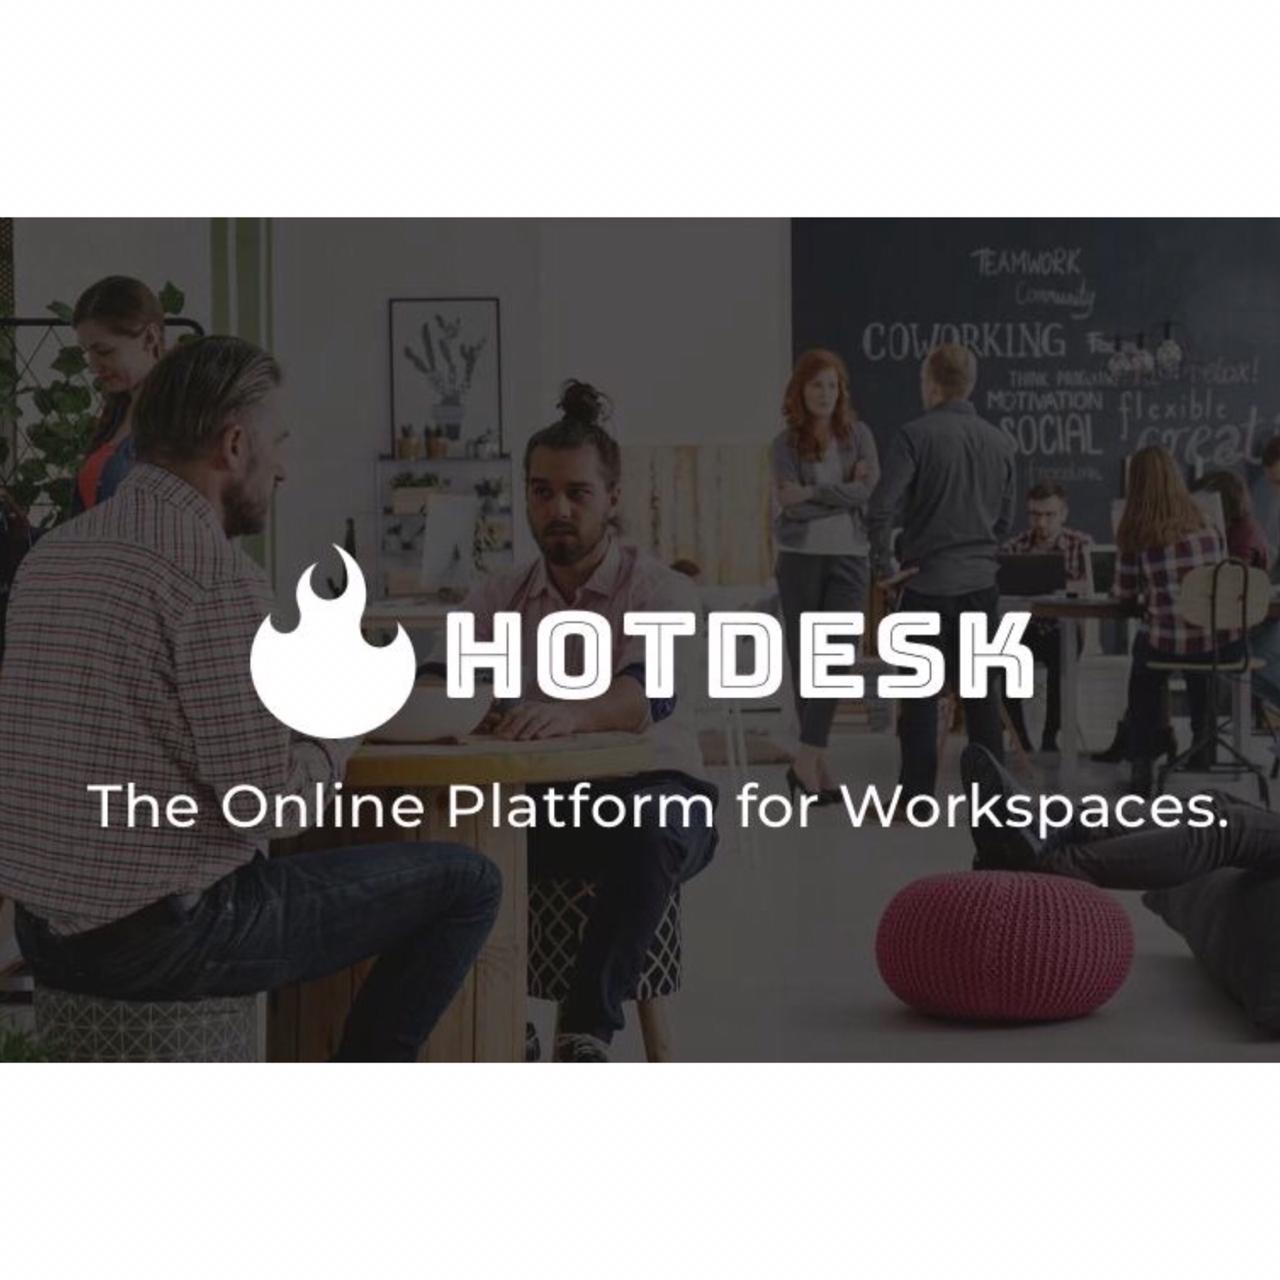 There's an app for that: Hotdesk